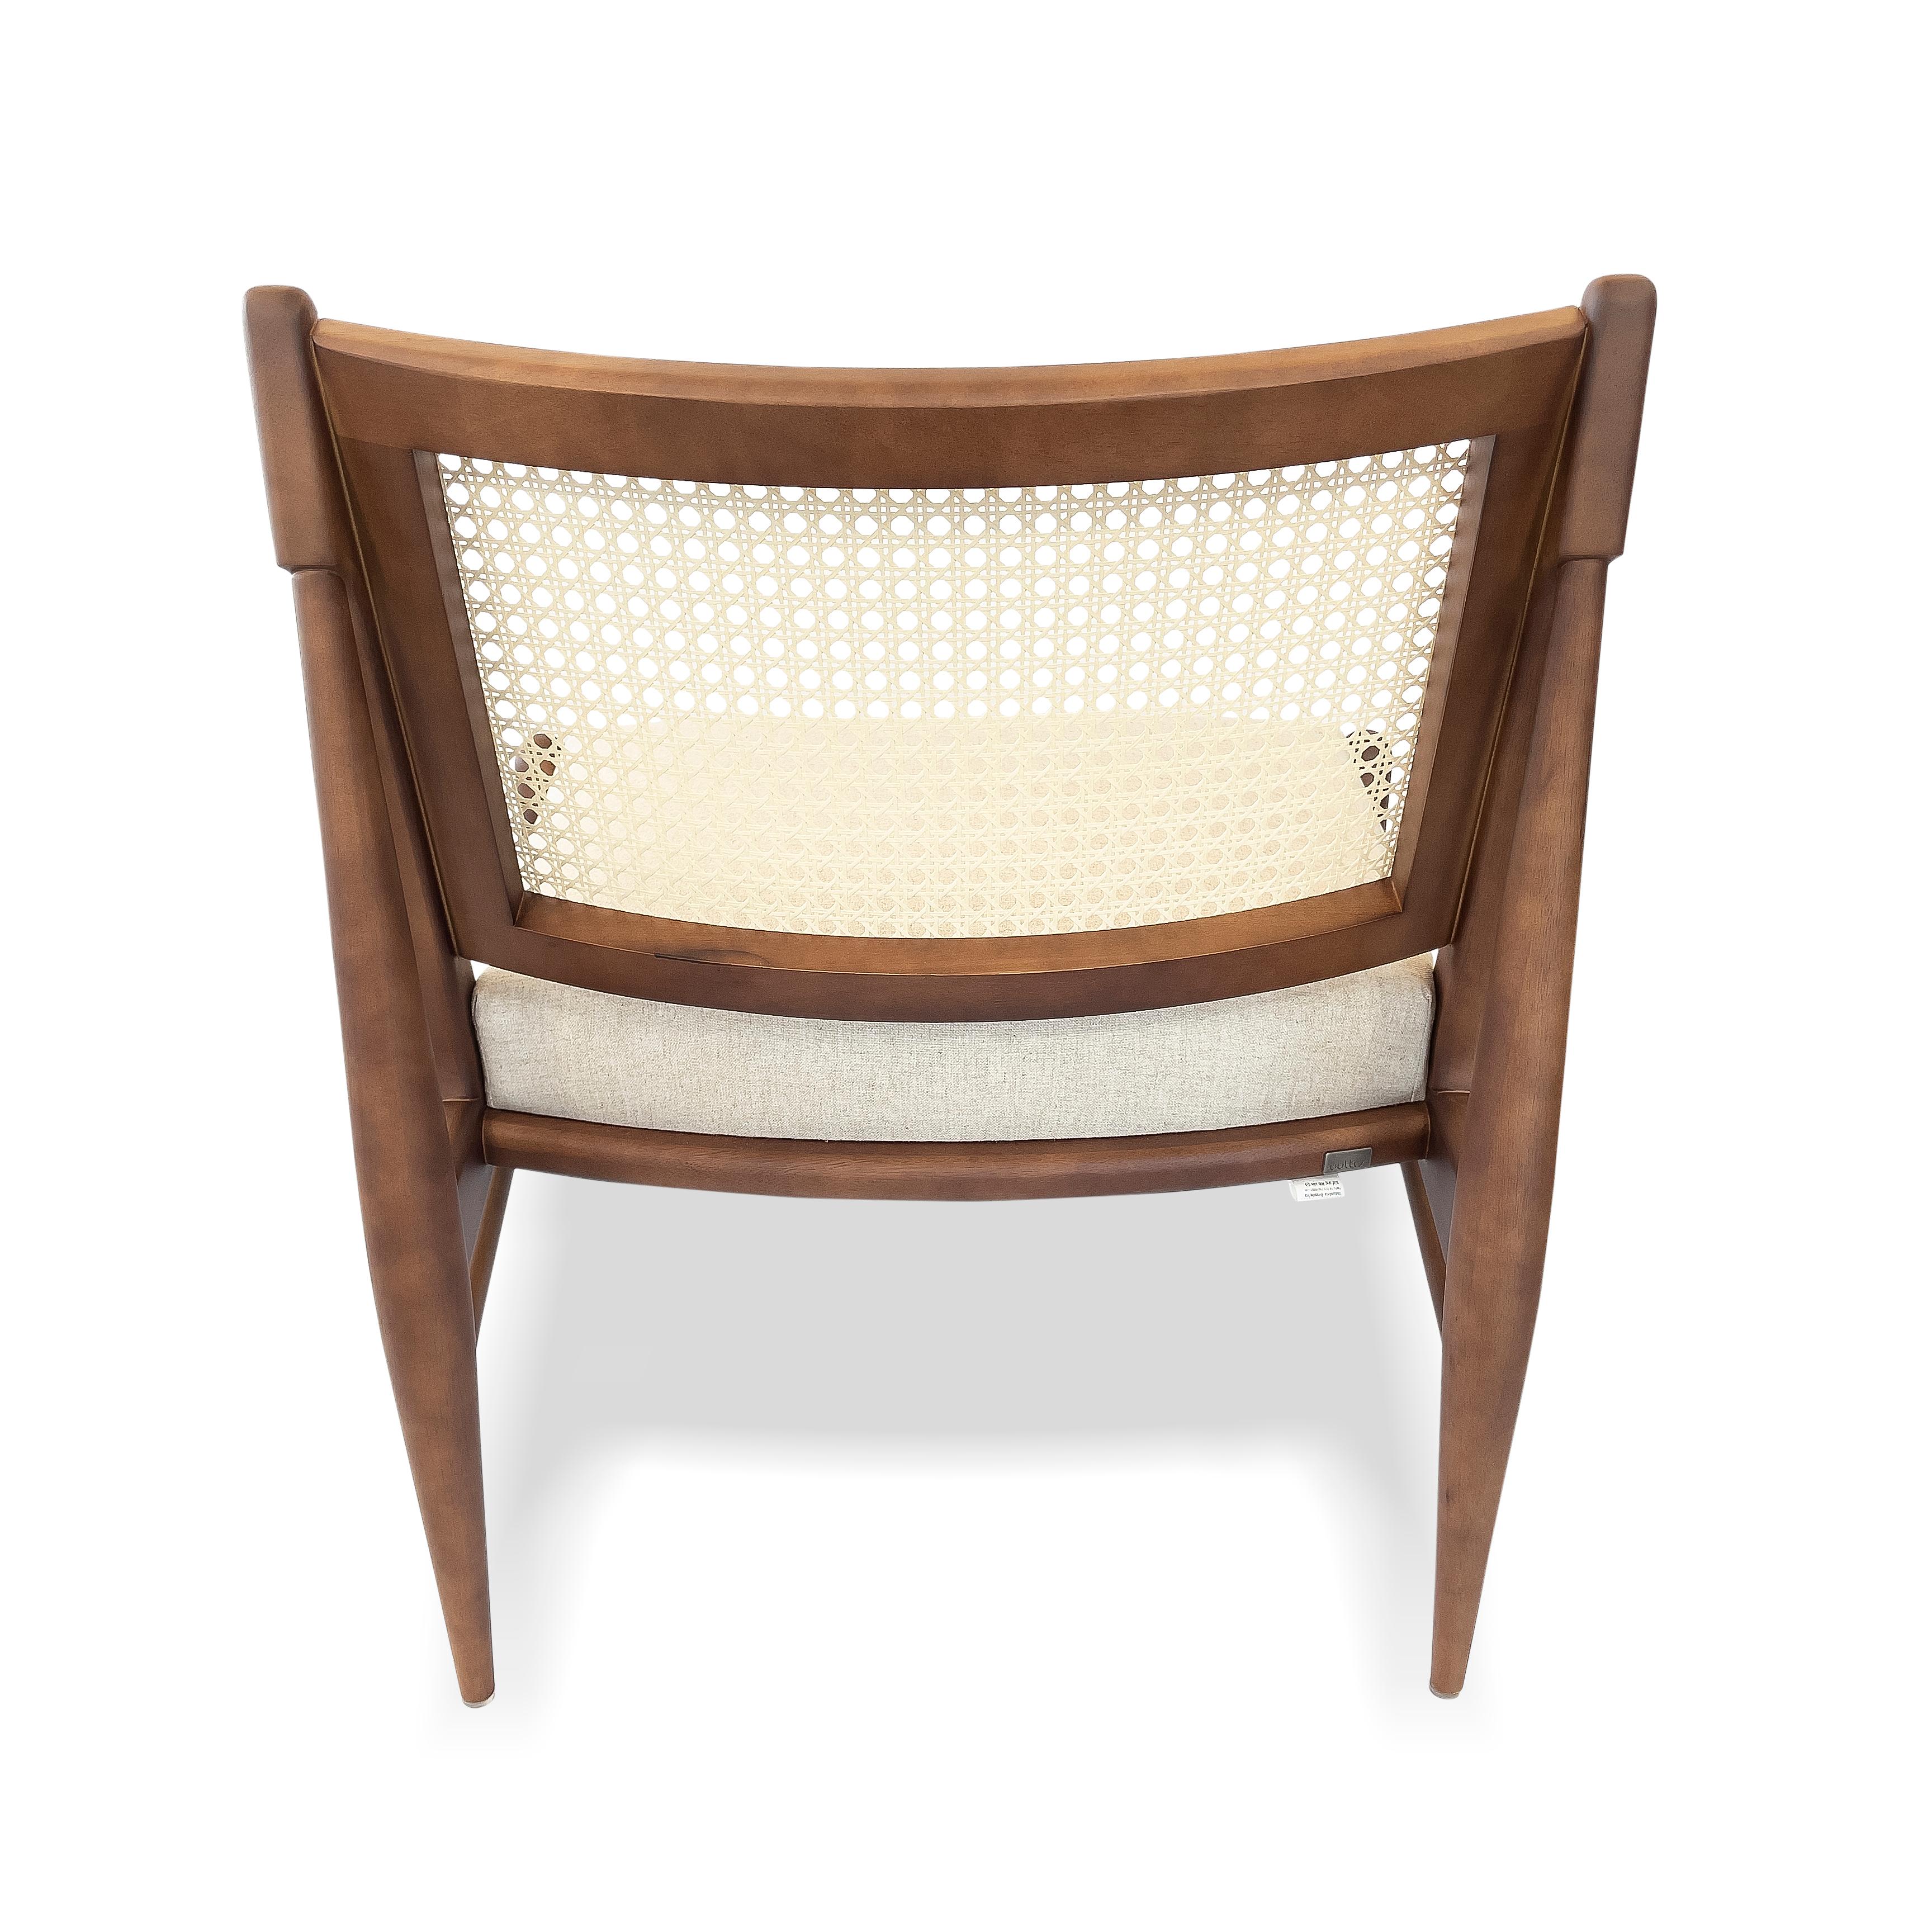 Donna Cane-Back Chair in Walnut Wood Finish with an Ivory Fabric Seat In New Condition For Sale In Miami, FL